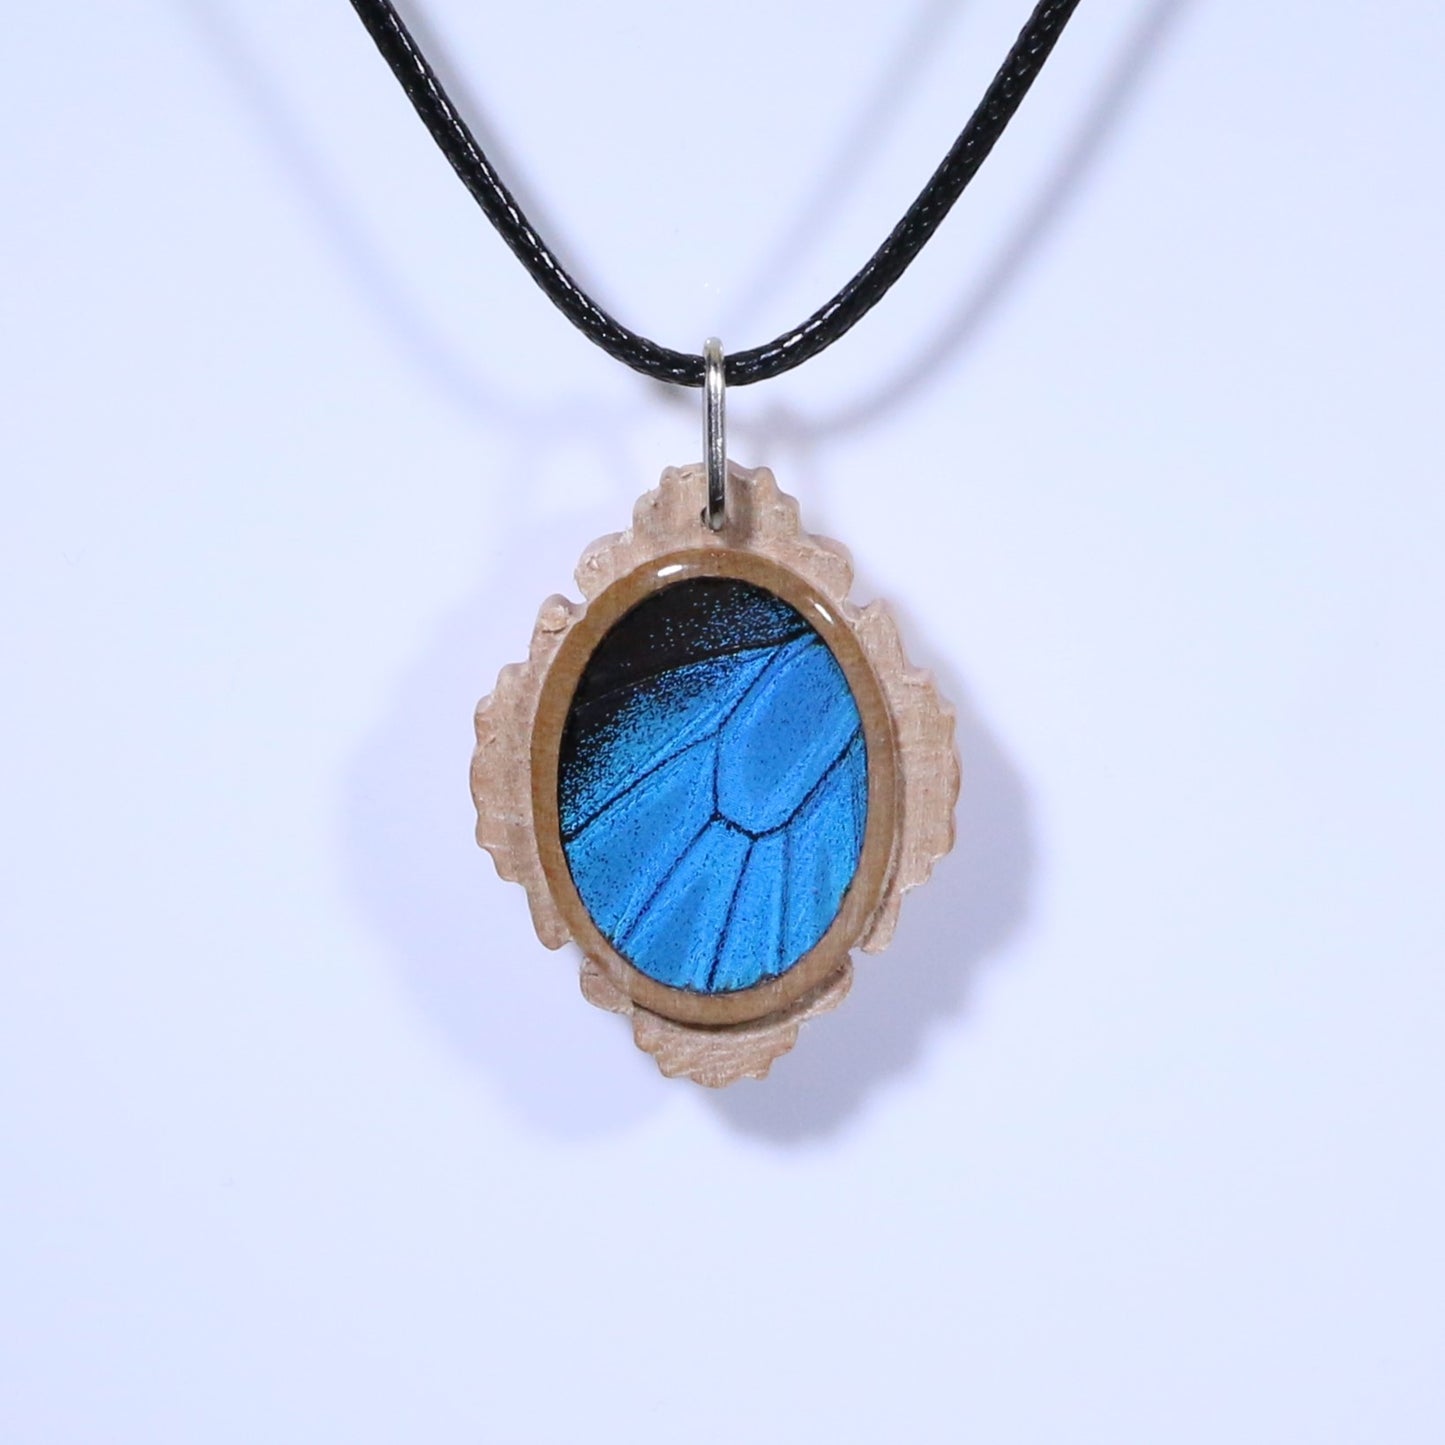 52707 - Real Butterfly Wing Jewelry - Pendant - Tan Wood - Oval - Filigree - Blue Mountain Swallowtail